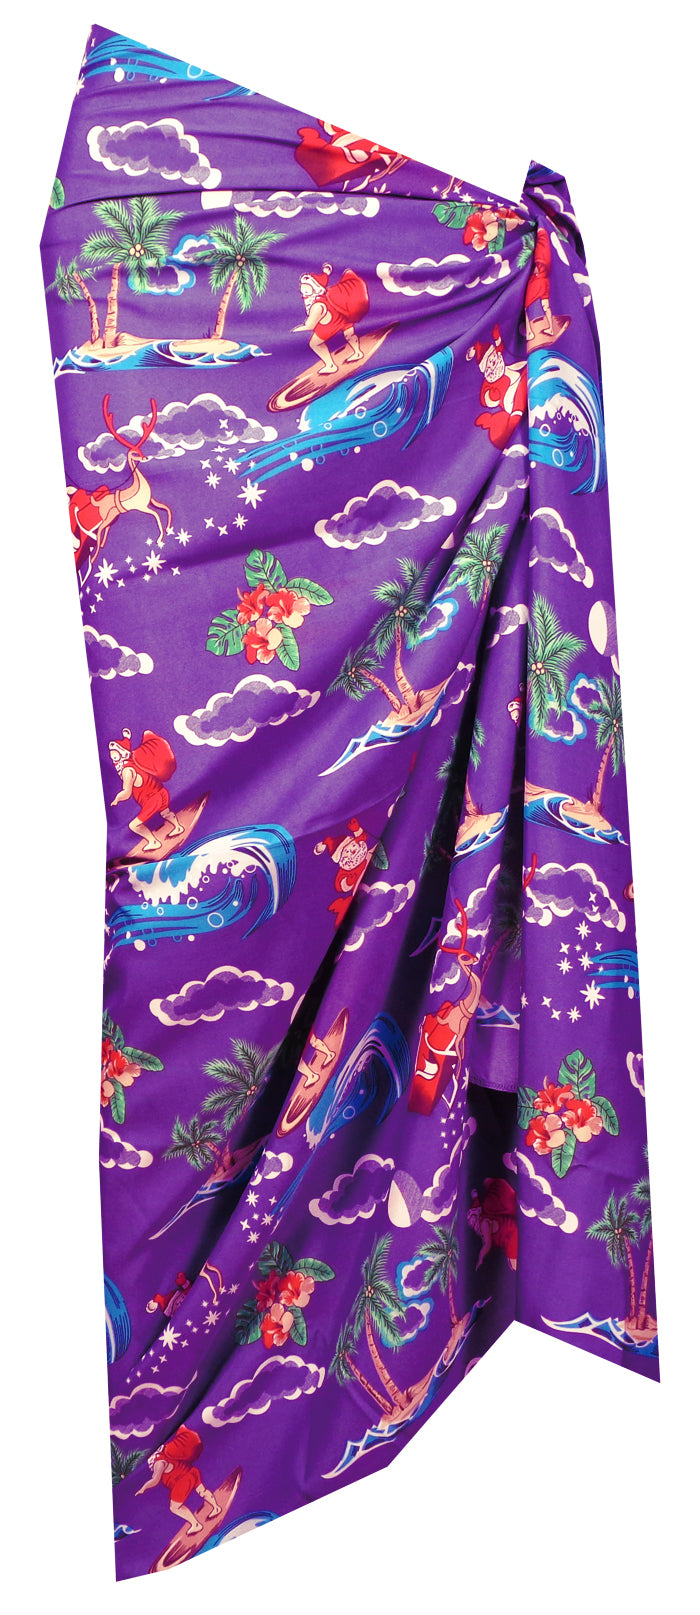 Sarong Christmas Santa Claus Party Swimsuit Wrap One Size Pareo Holiday Beach